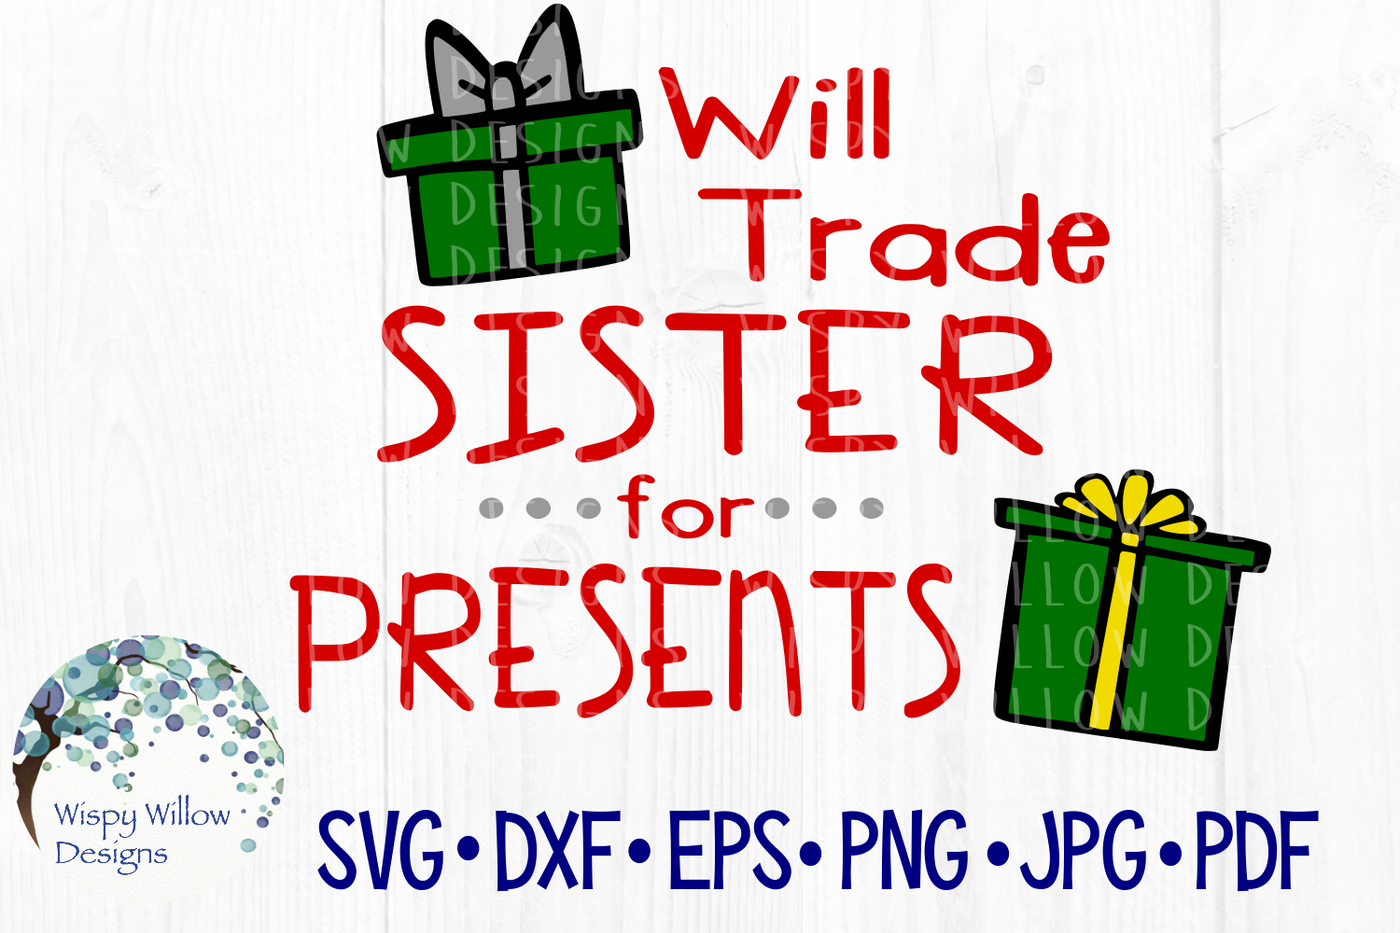 Will Trade Sister For Presents Christmas Svg Dxf Eps Png Jpg Pdf By Wispy Willow Designs Thehungryjpeg Com